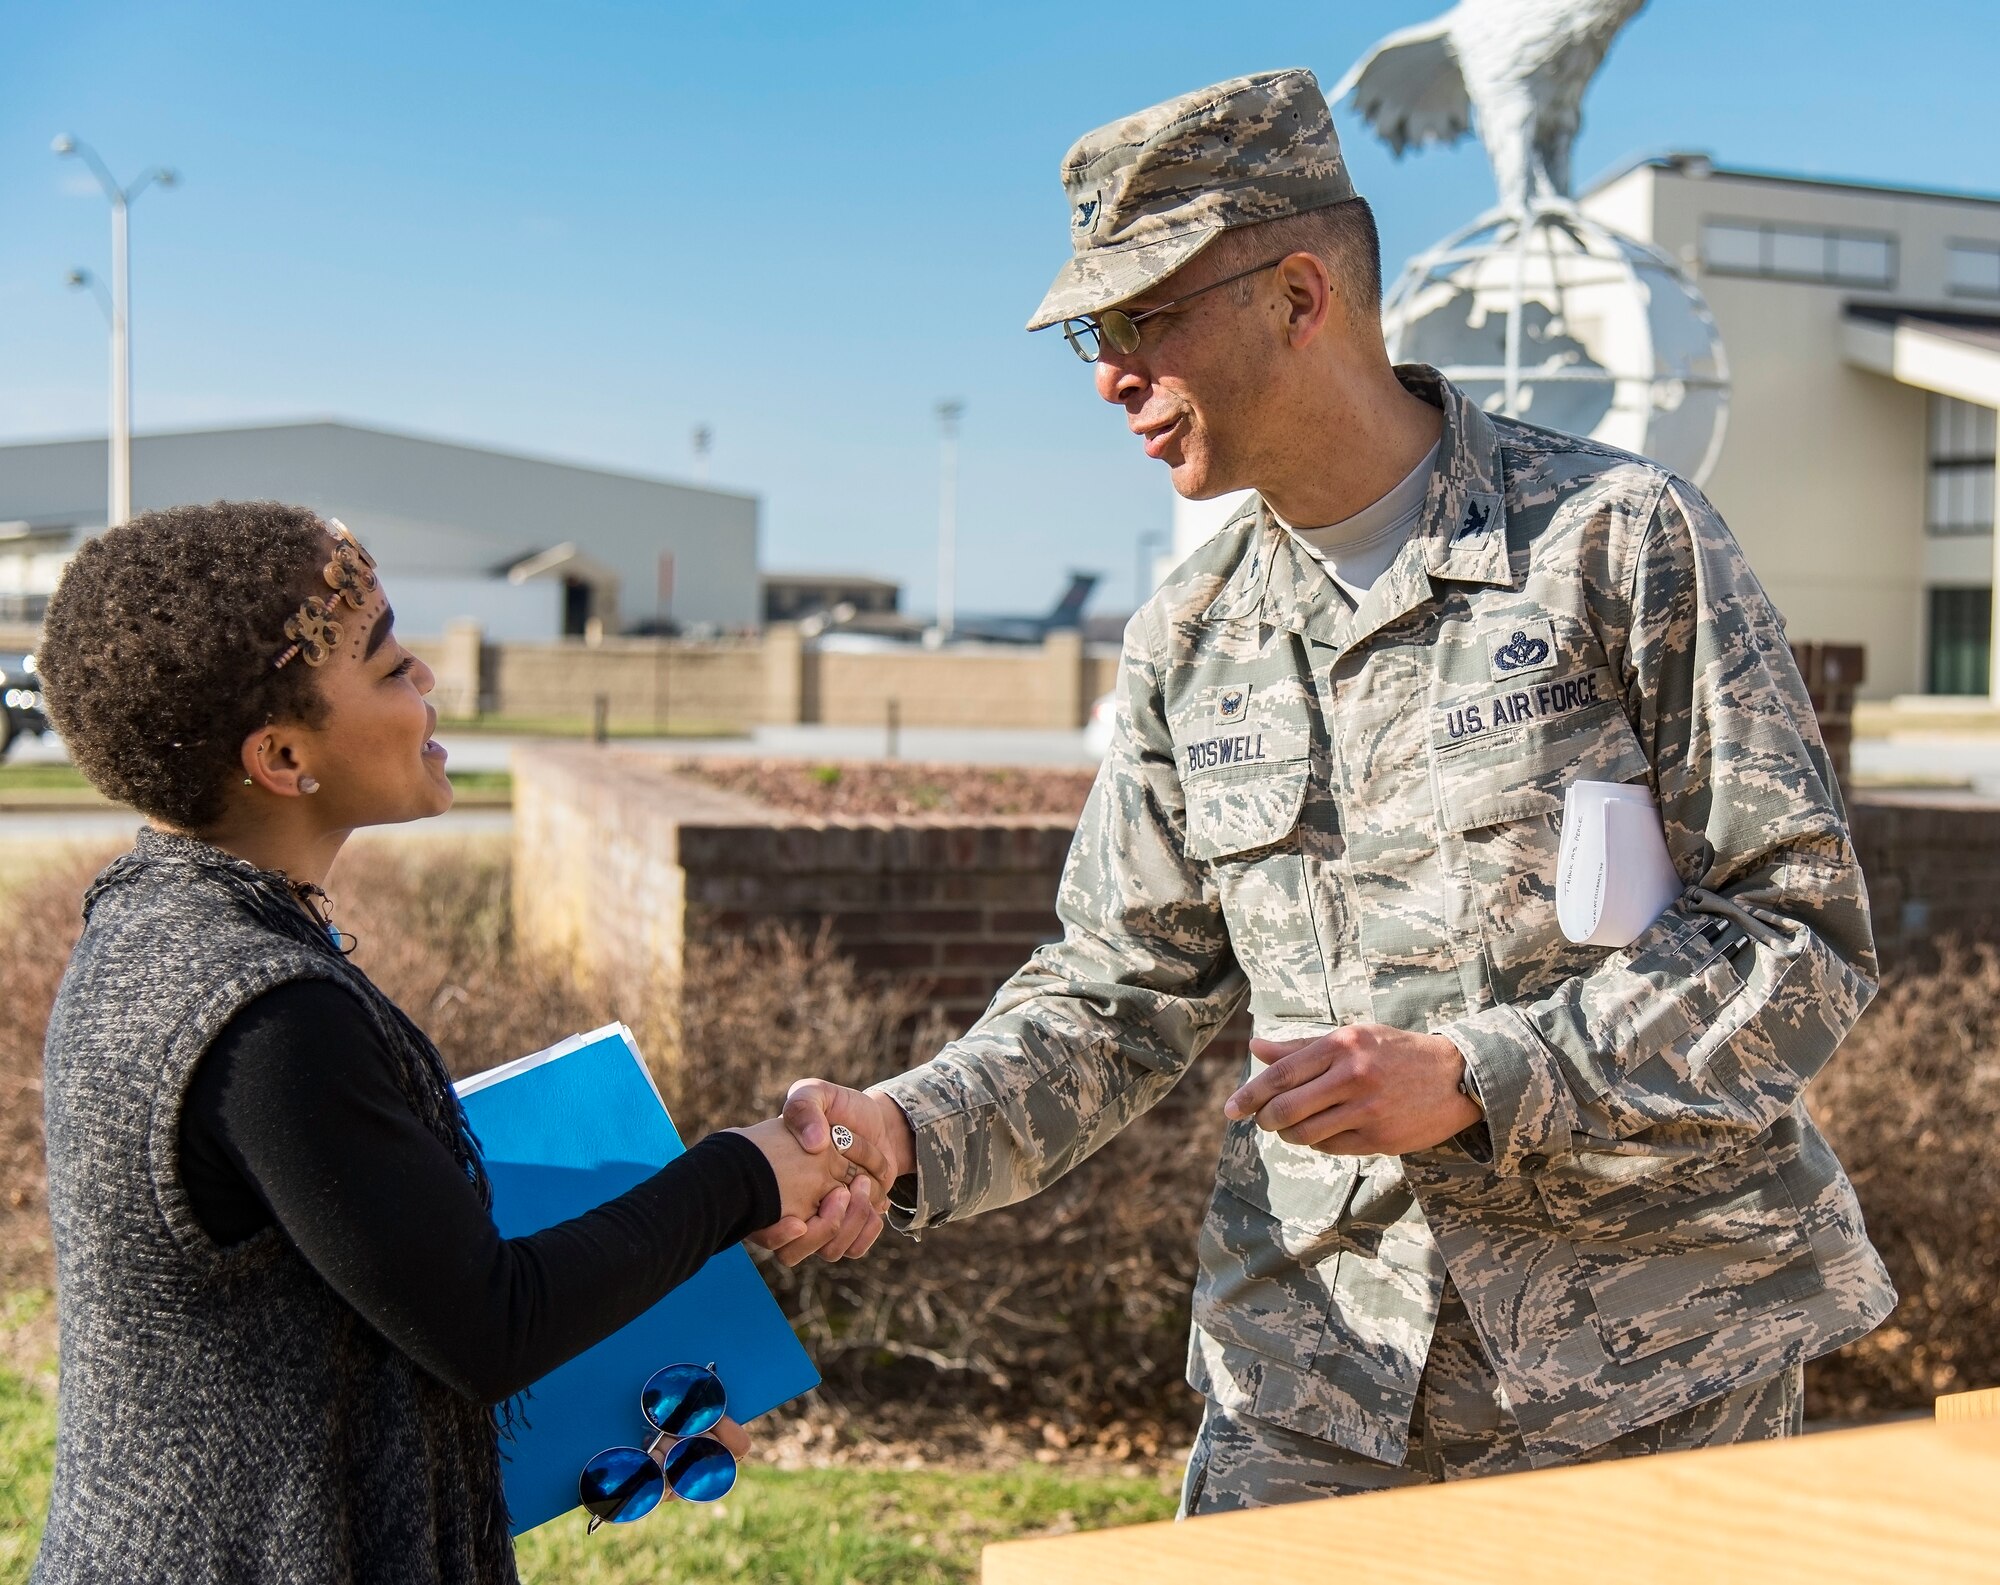 Col. Randy Boswell, 436th Mission Support Group commander, presents a coin to Ikira Peace, guest speaker for the Black History Month Unity Walk, Feb. 28, 2018, on Dover Air Force Base, Del. Peace, a native of Baltimore, Md., is a senior at the University of Delaware, Newark, Del. (U.S. Air Force photo by Roland Balik)